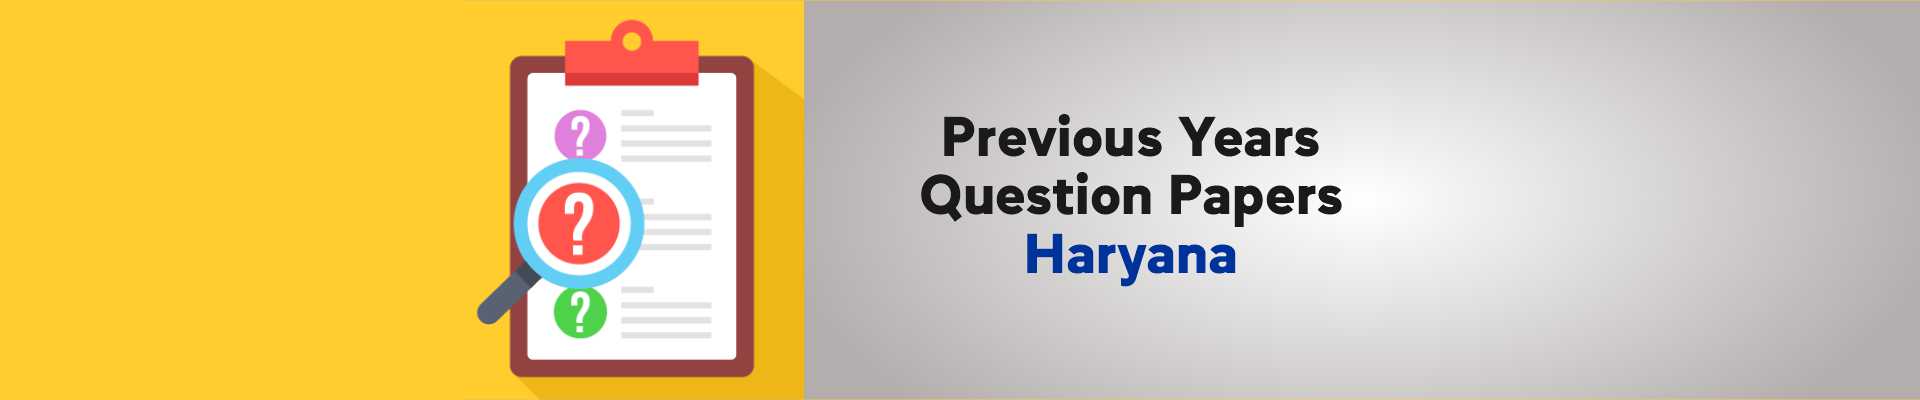 PREVIOUS YEARS QUESTION PAPERS HARYANA